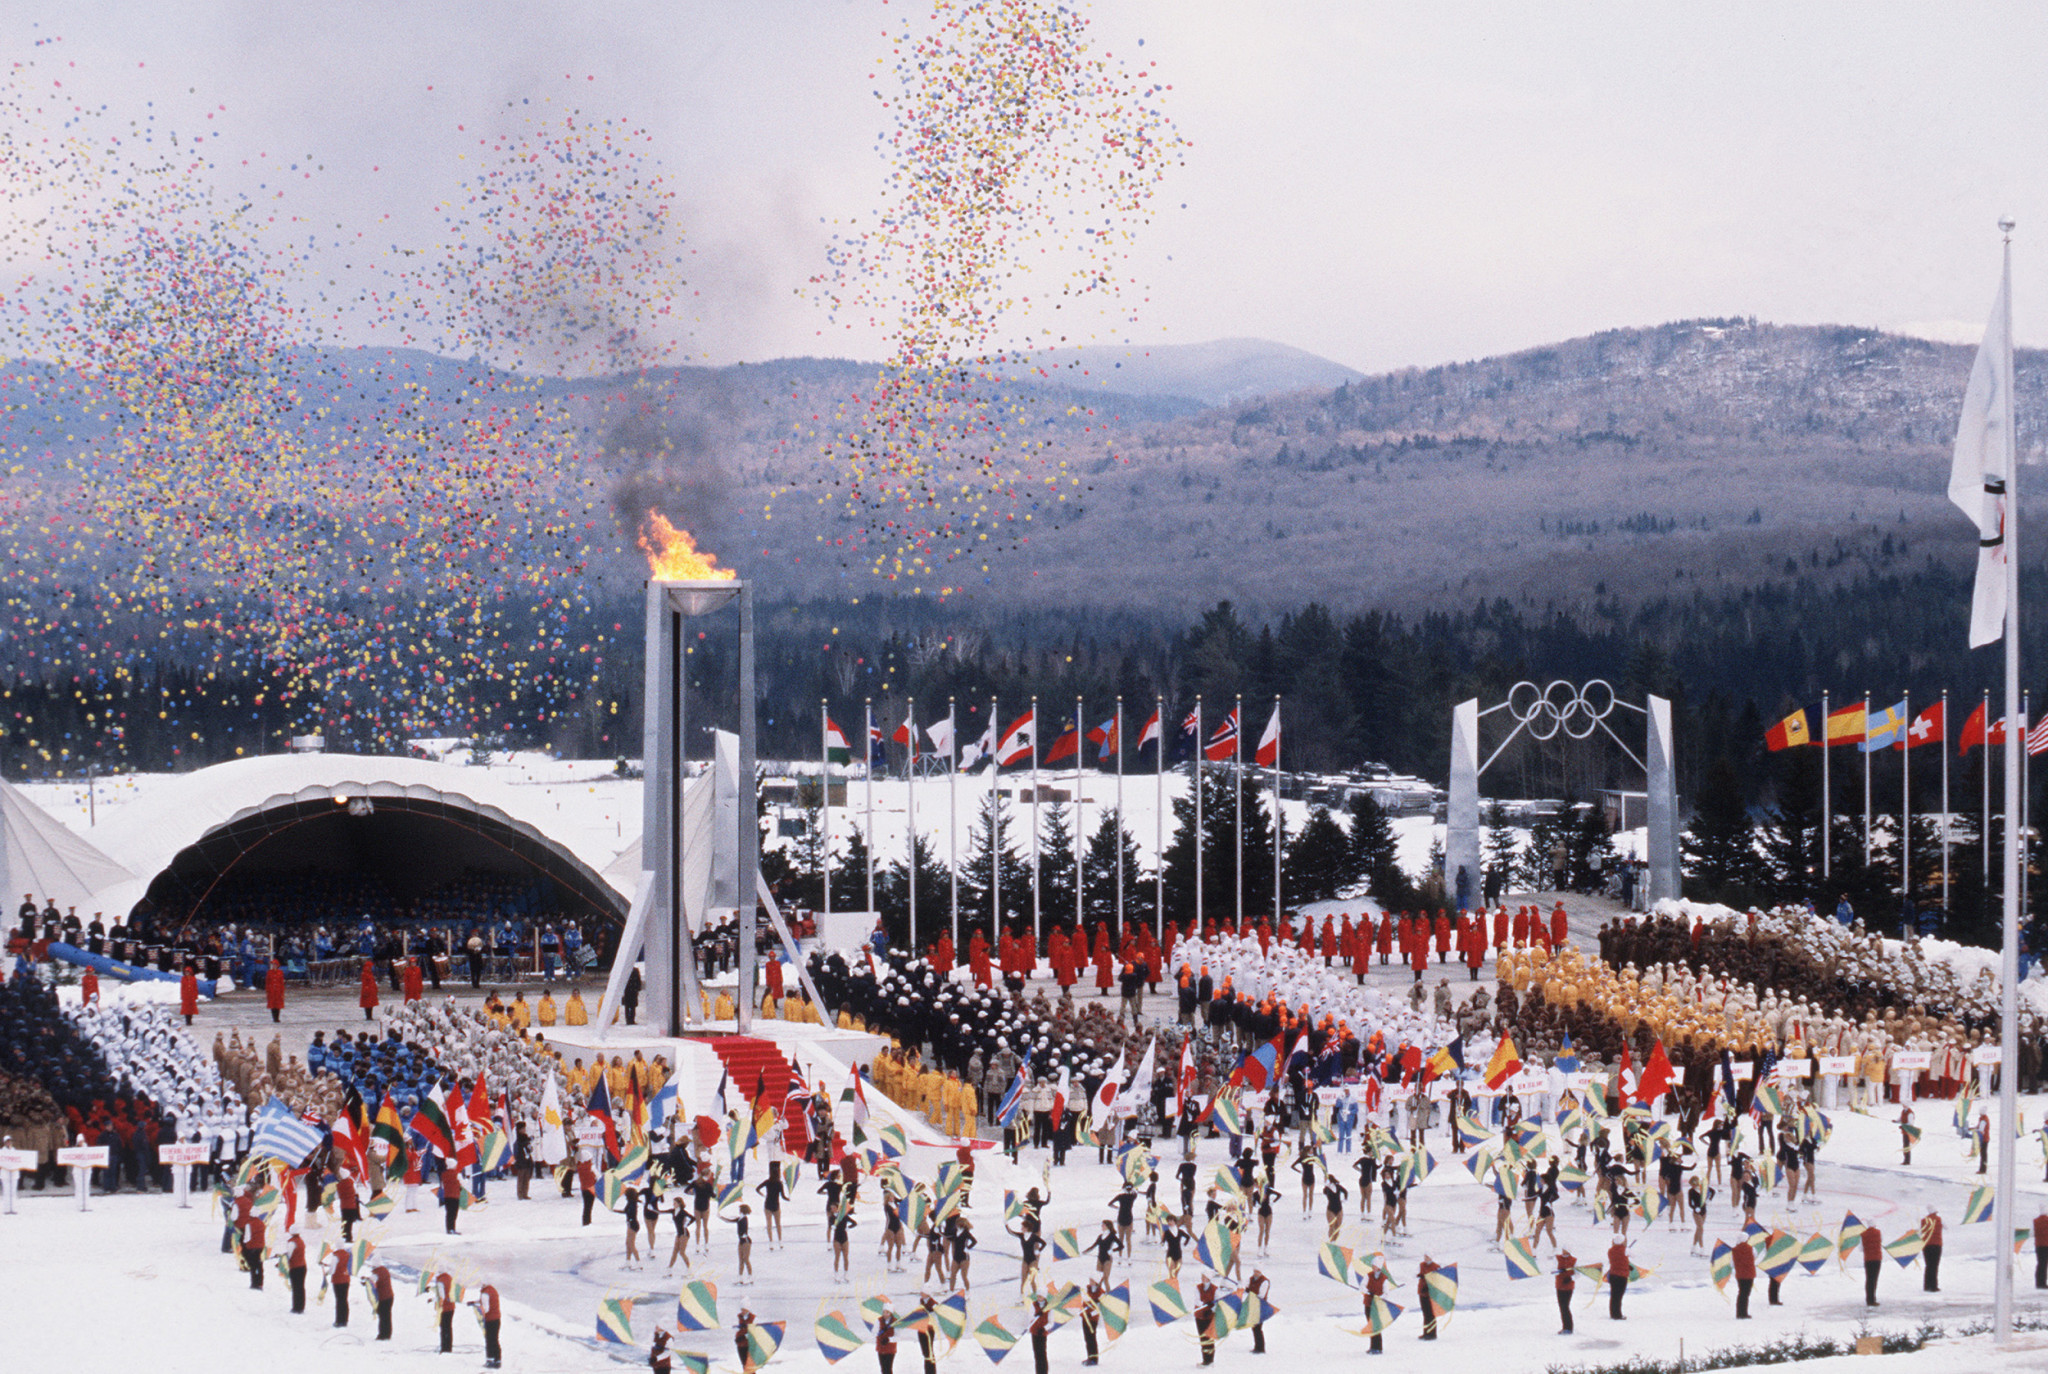 Lake Placid staged the 1932 and 1980 Winter Olympics but may never do so again unless carbon emissions are reduced ©Getty Images